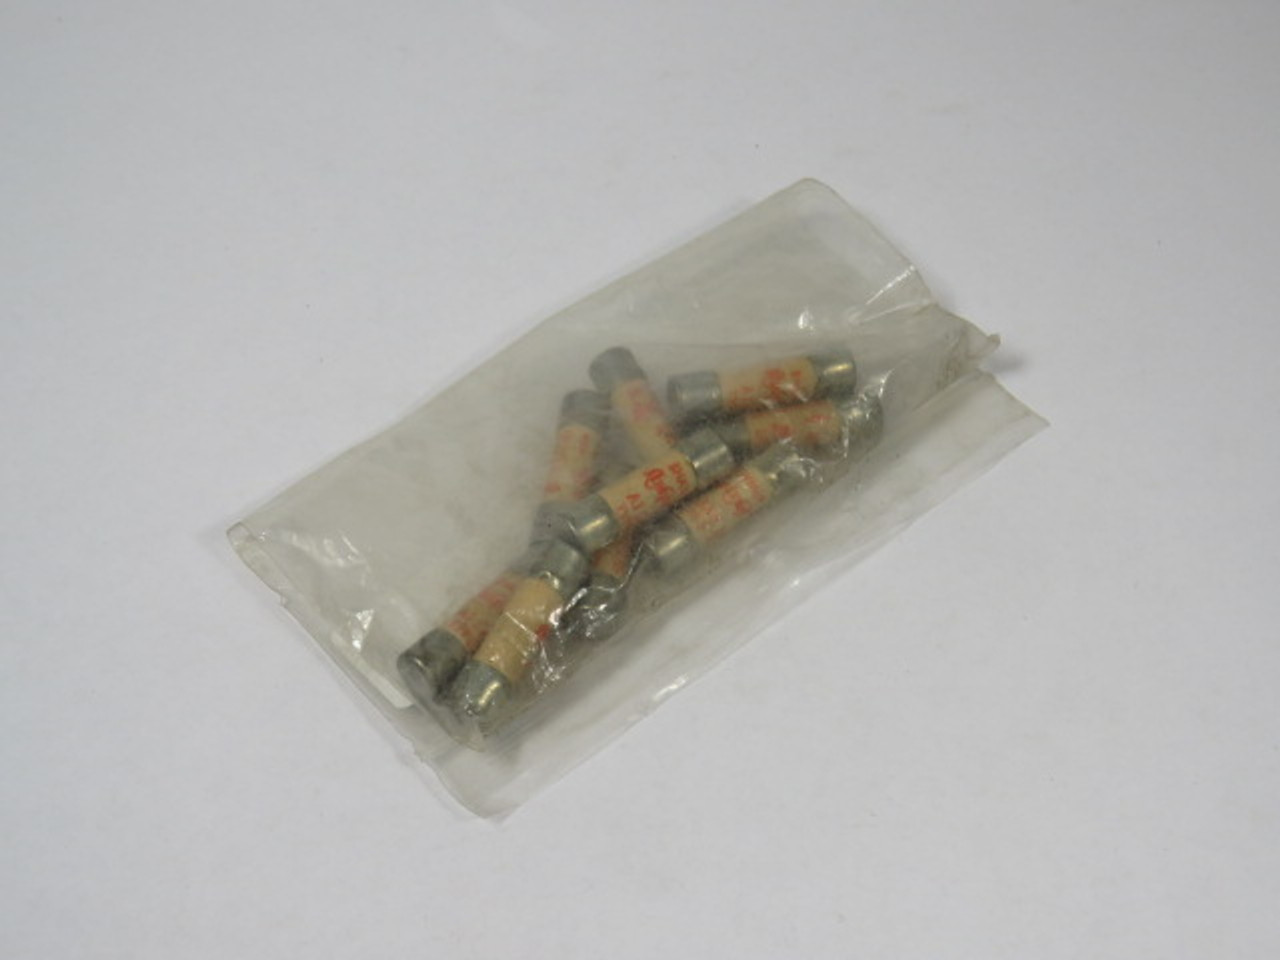 Shawmut A13X3 Semiconductor Fuse 3A Lot of 10 USED